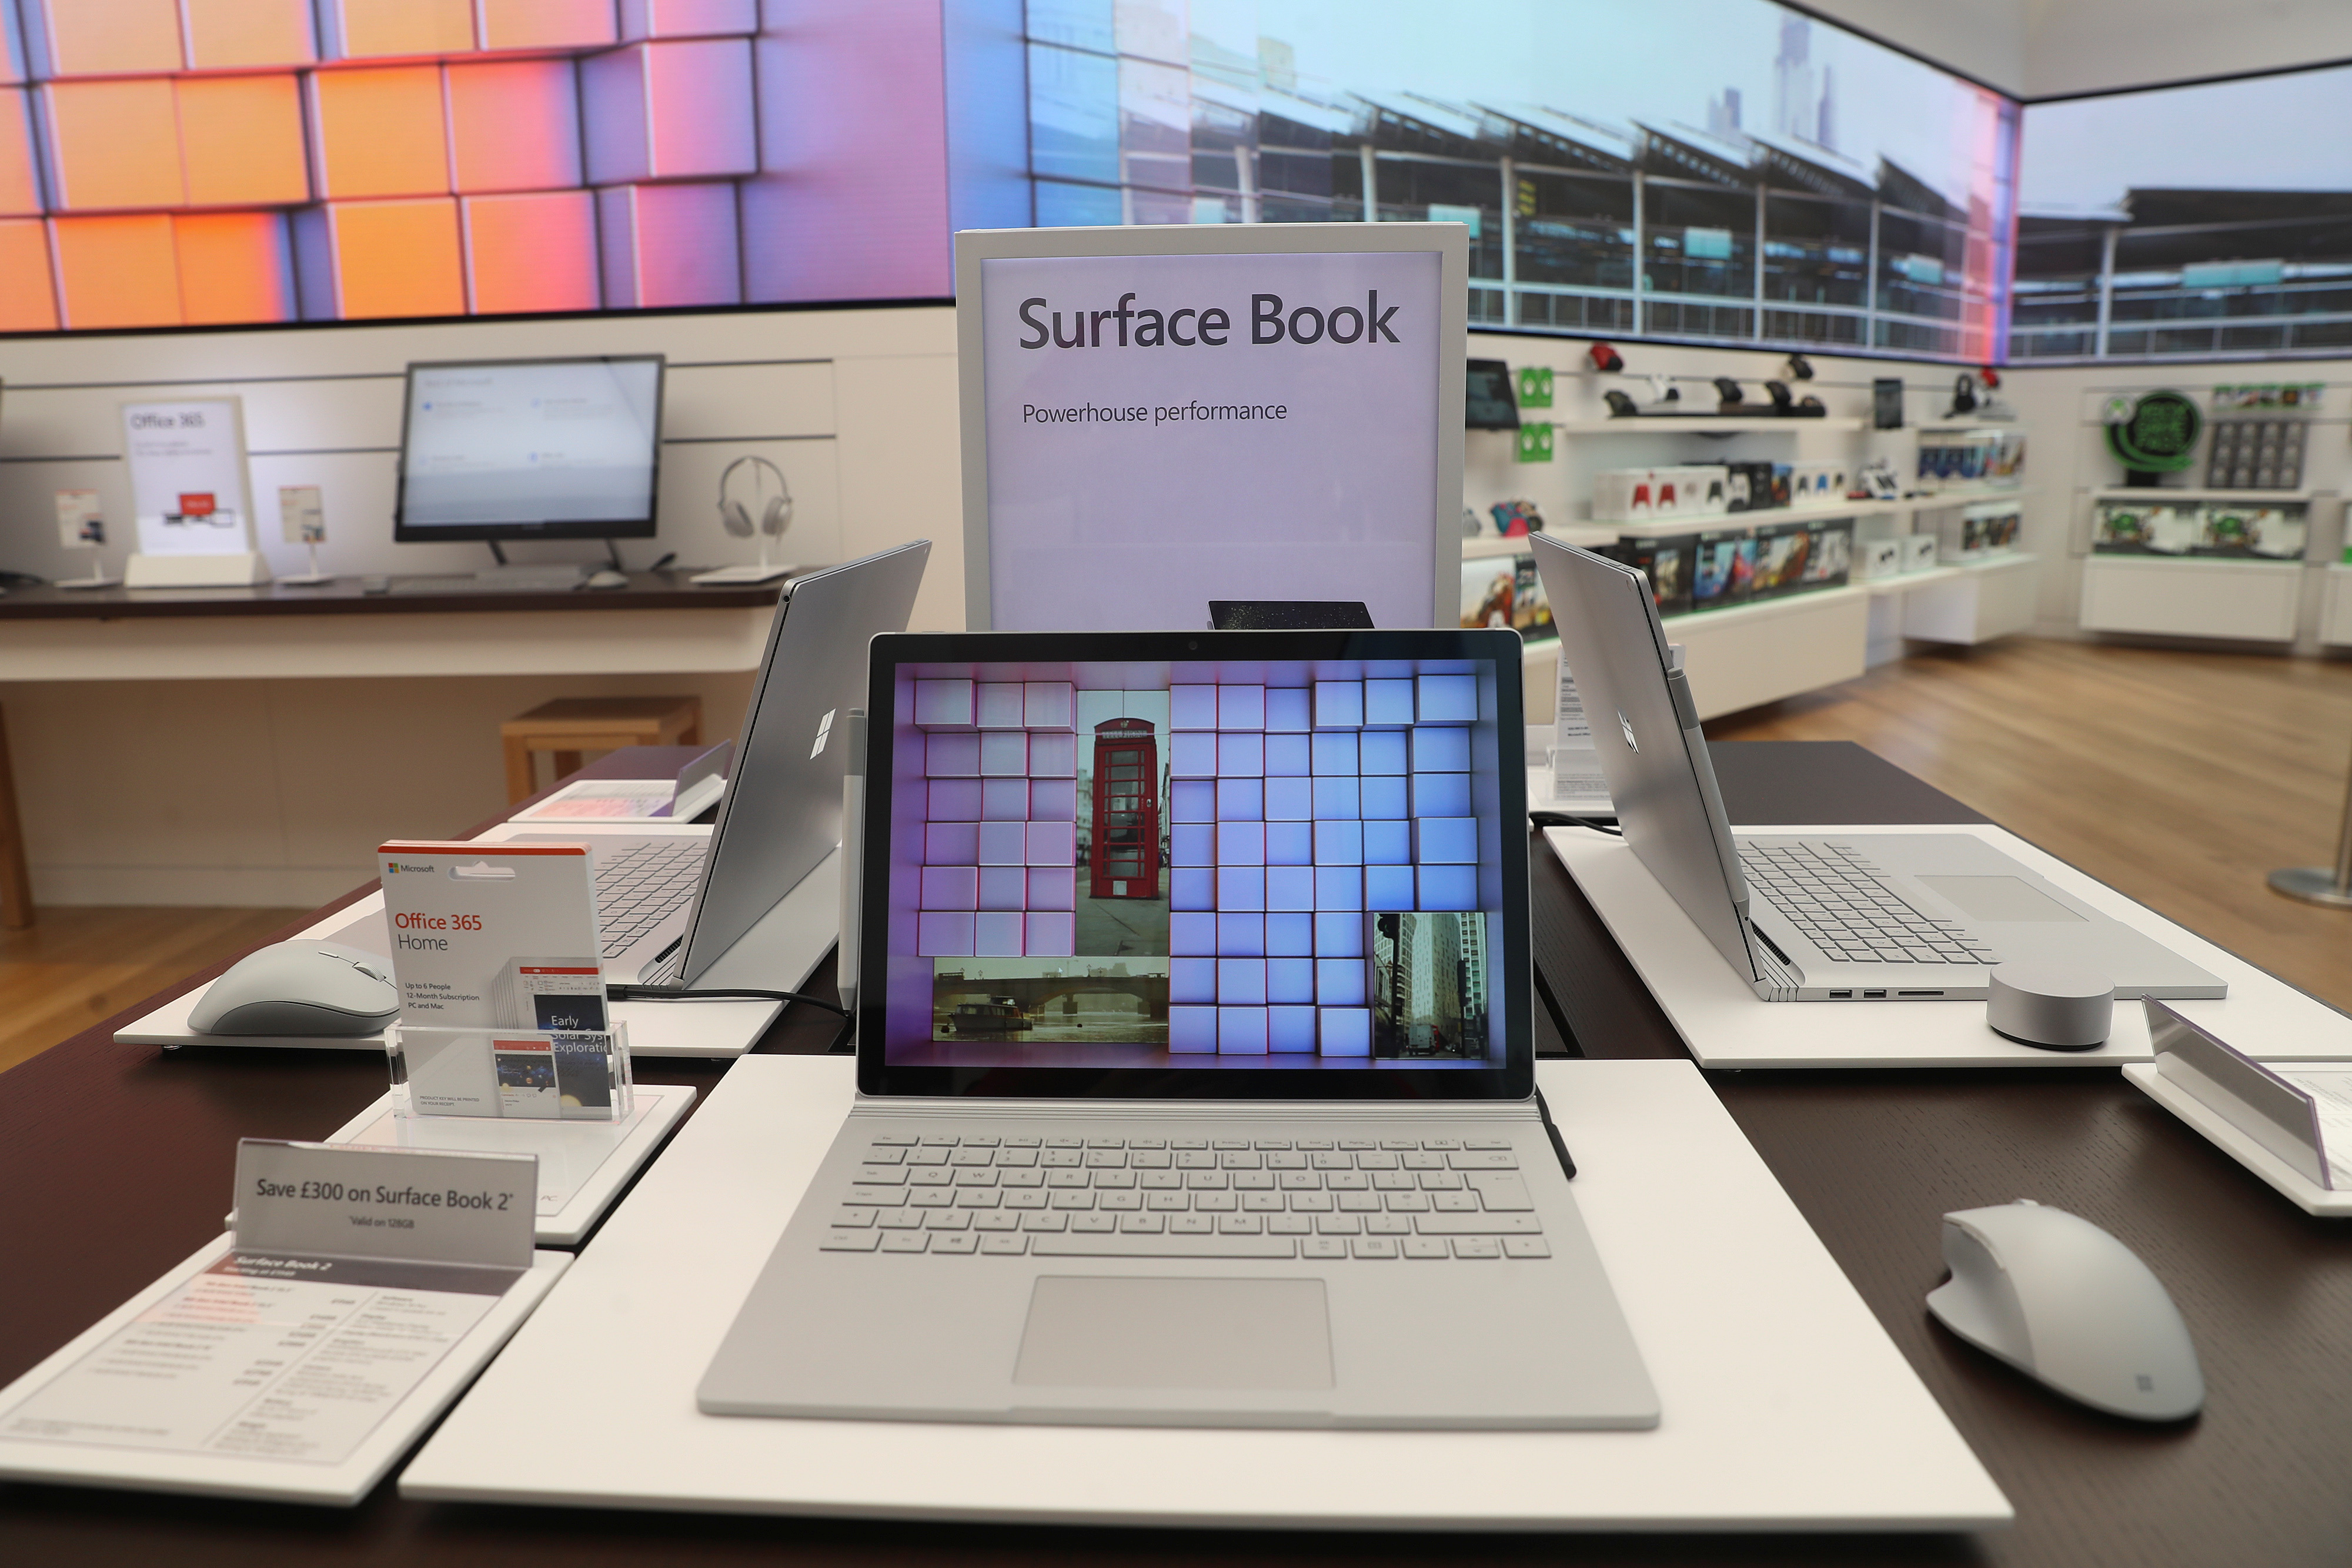 Surface book laptops sit on display at Microsoft's new Oxford Circus store ahead of its opening in London